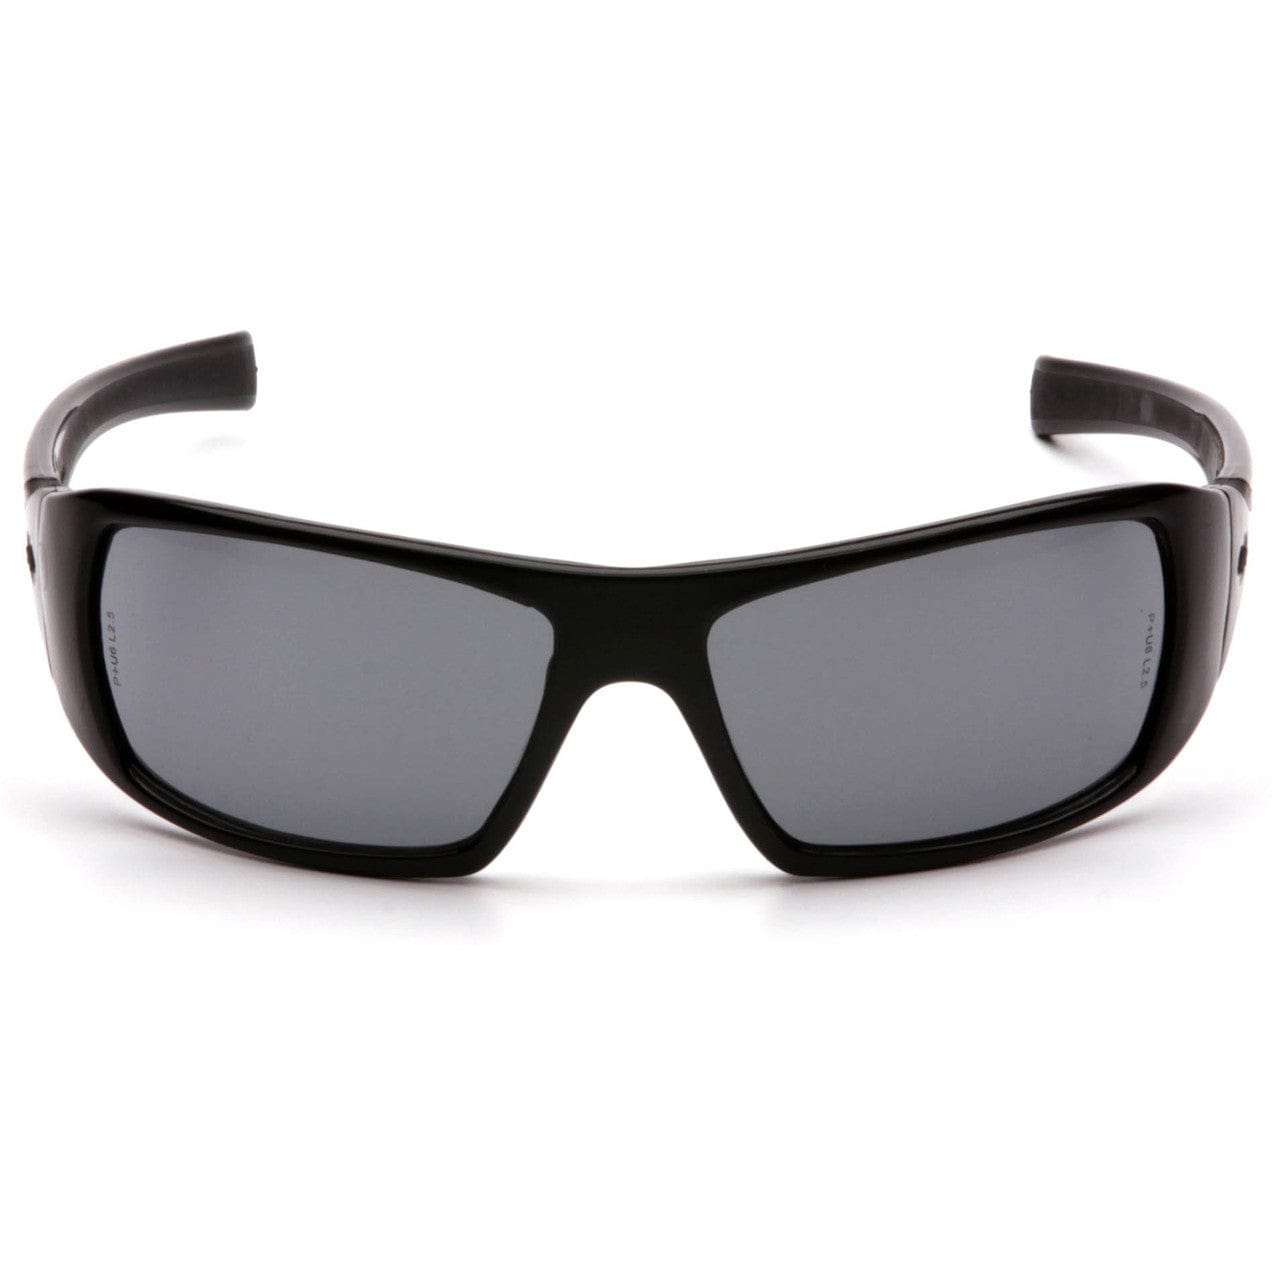 Pyramex Goliath Safety Glasses with Black Frame and Gray Lens SB5620D Front View